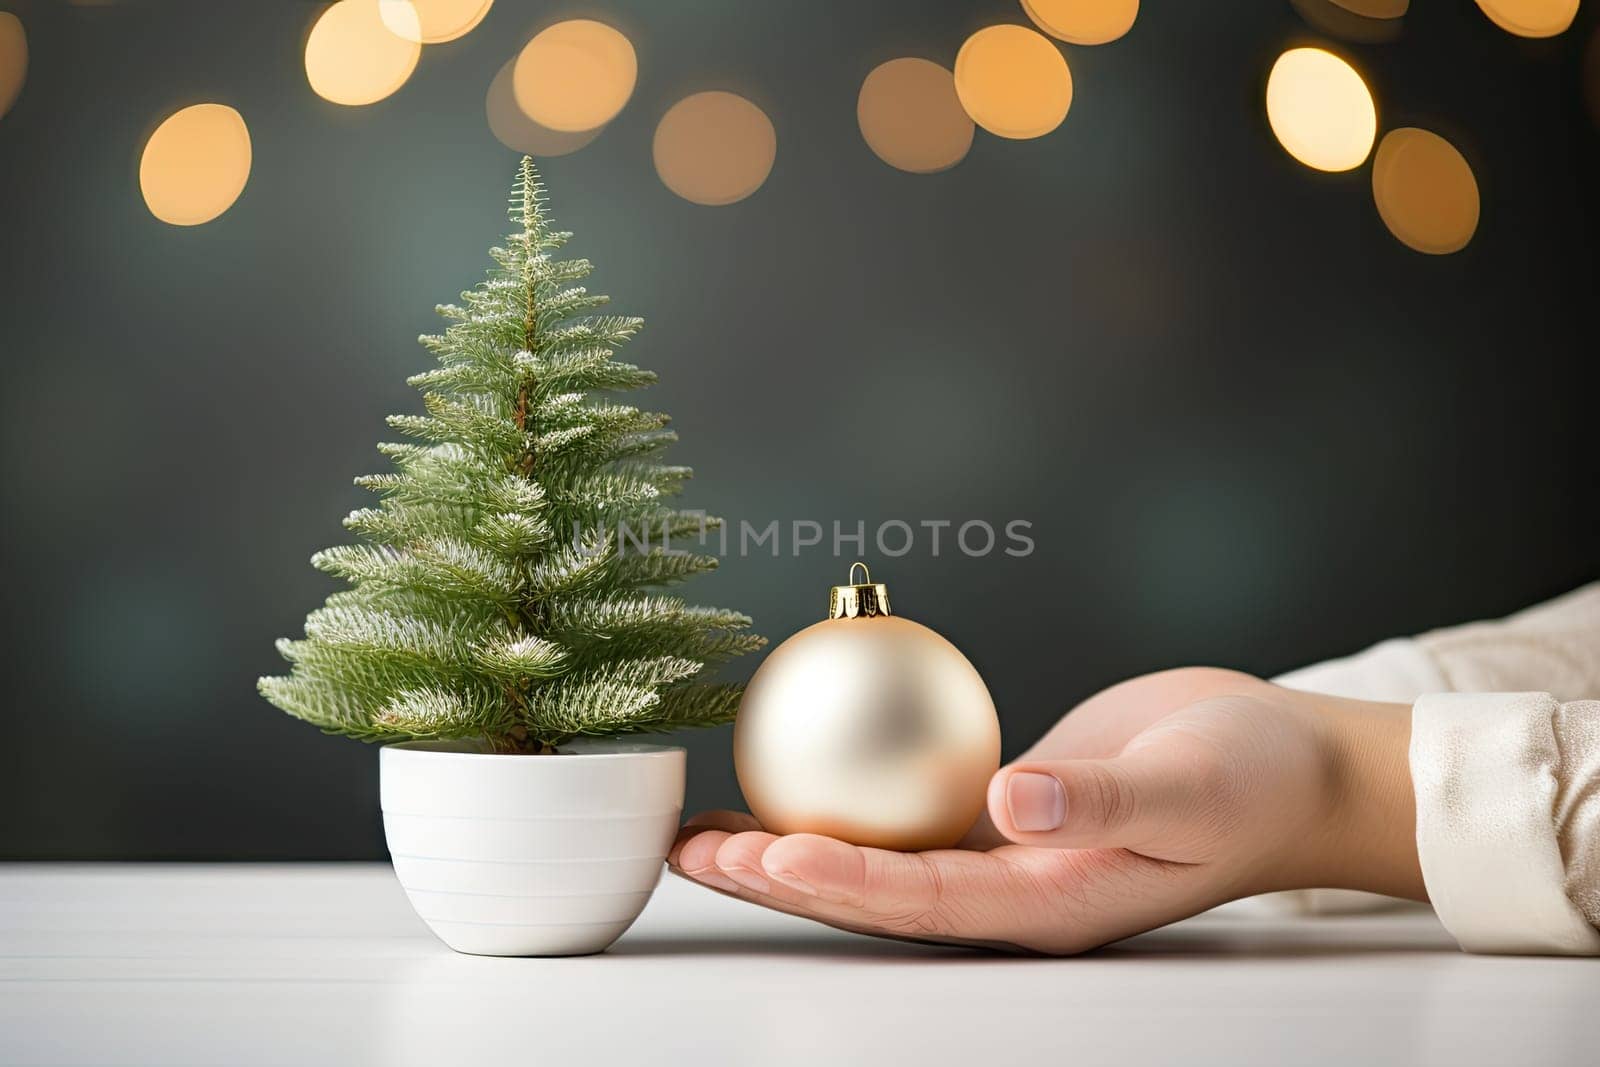 a person holding a christmas tree and a hand by golibtolibov